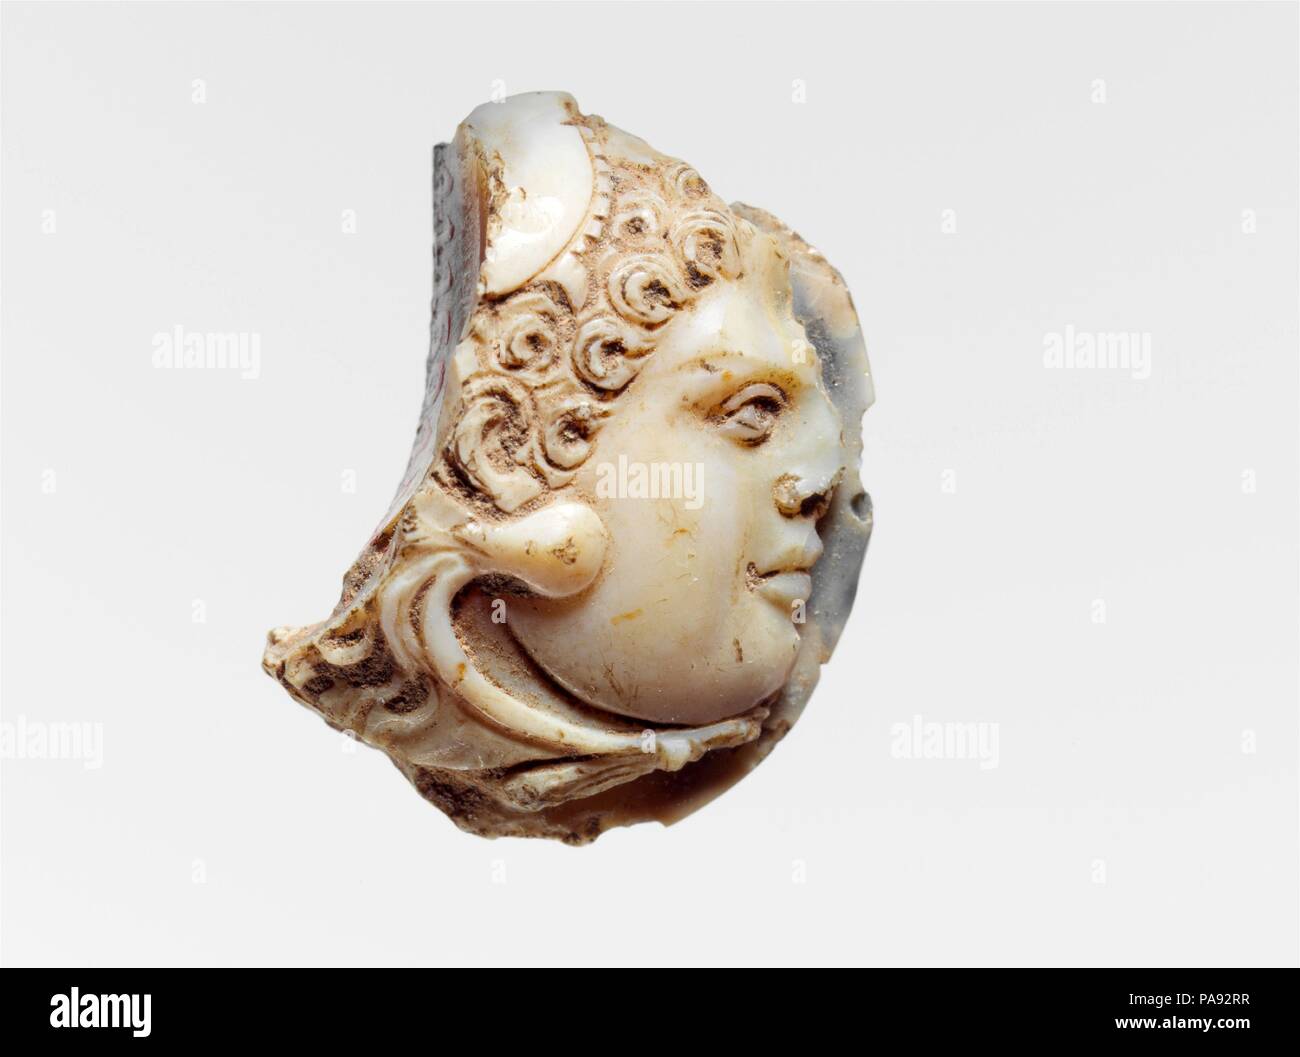 Onyx cameo. Culture: Roman. Dimensions: Length: 7/8 in. (2.3 cm). Date: late 1st century B.C.-3rd century A.D..  Portrait head of Alexander the Great as Herakles. Museum: Metropolitan Museum of Art, New York, USA. Stock Photo